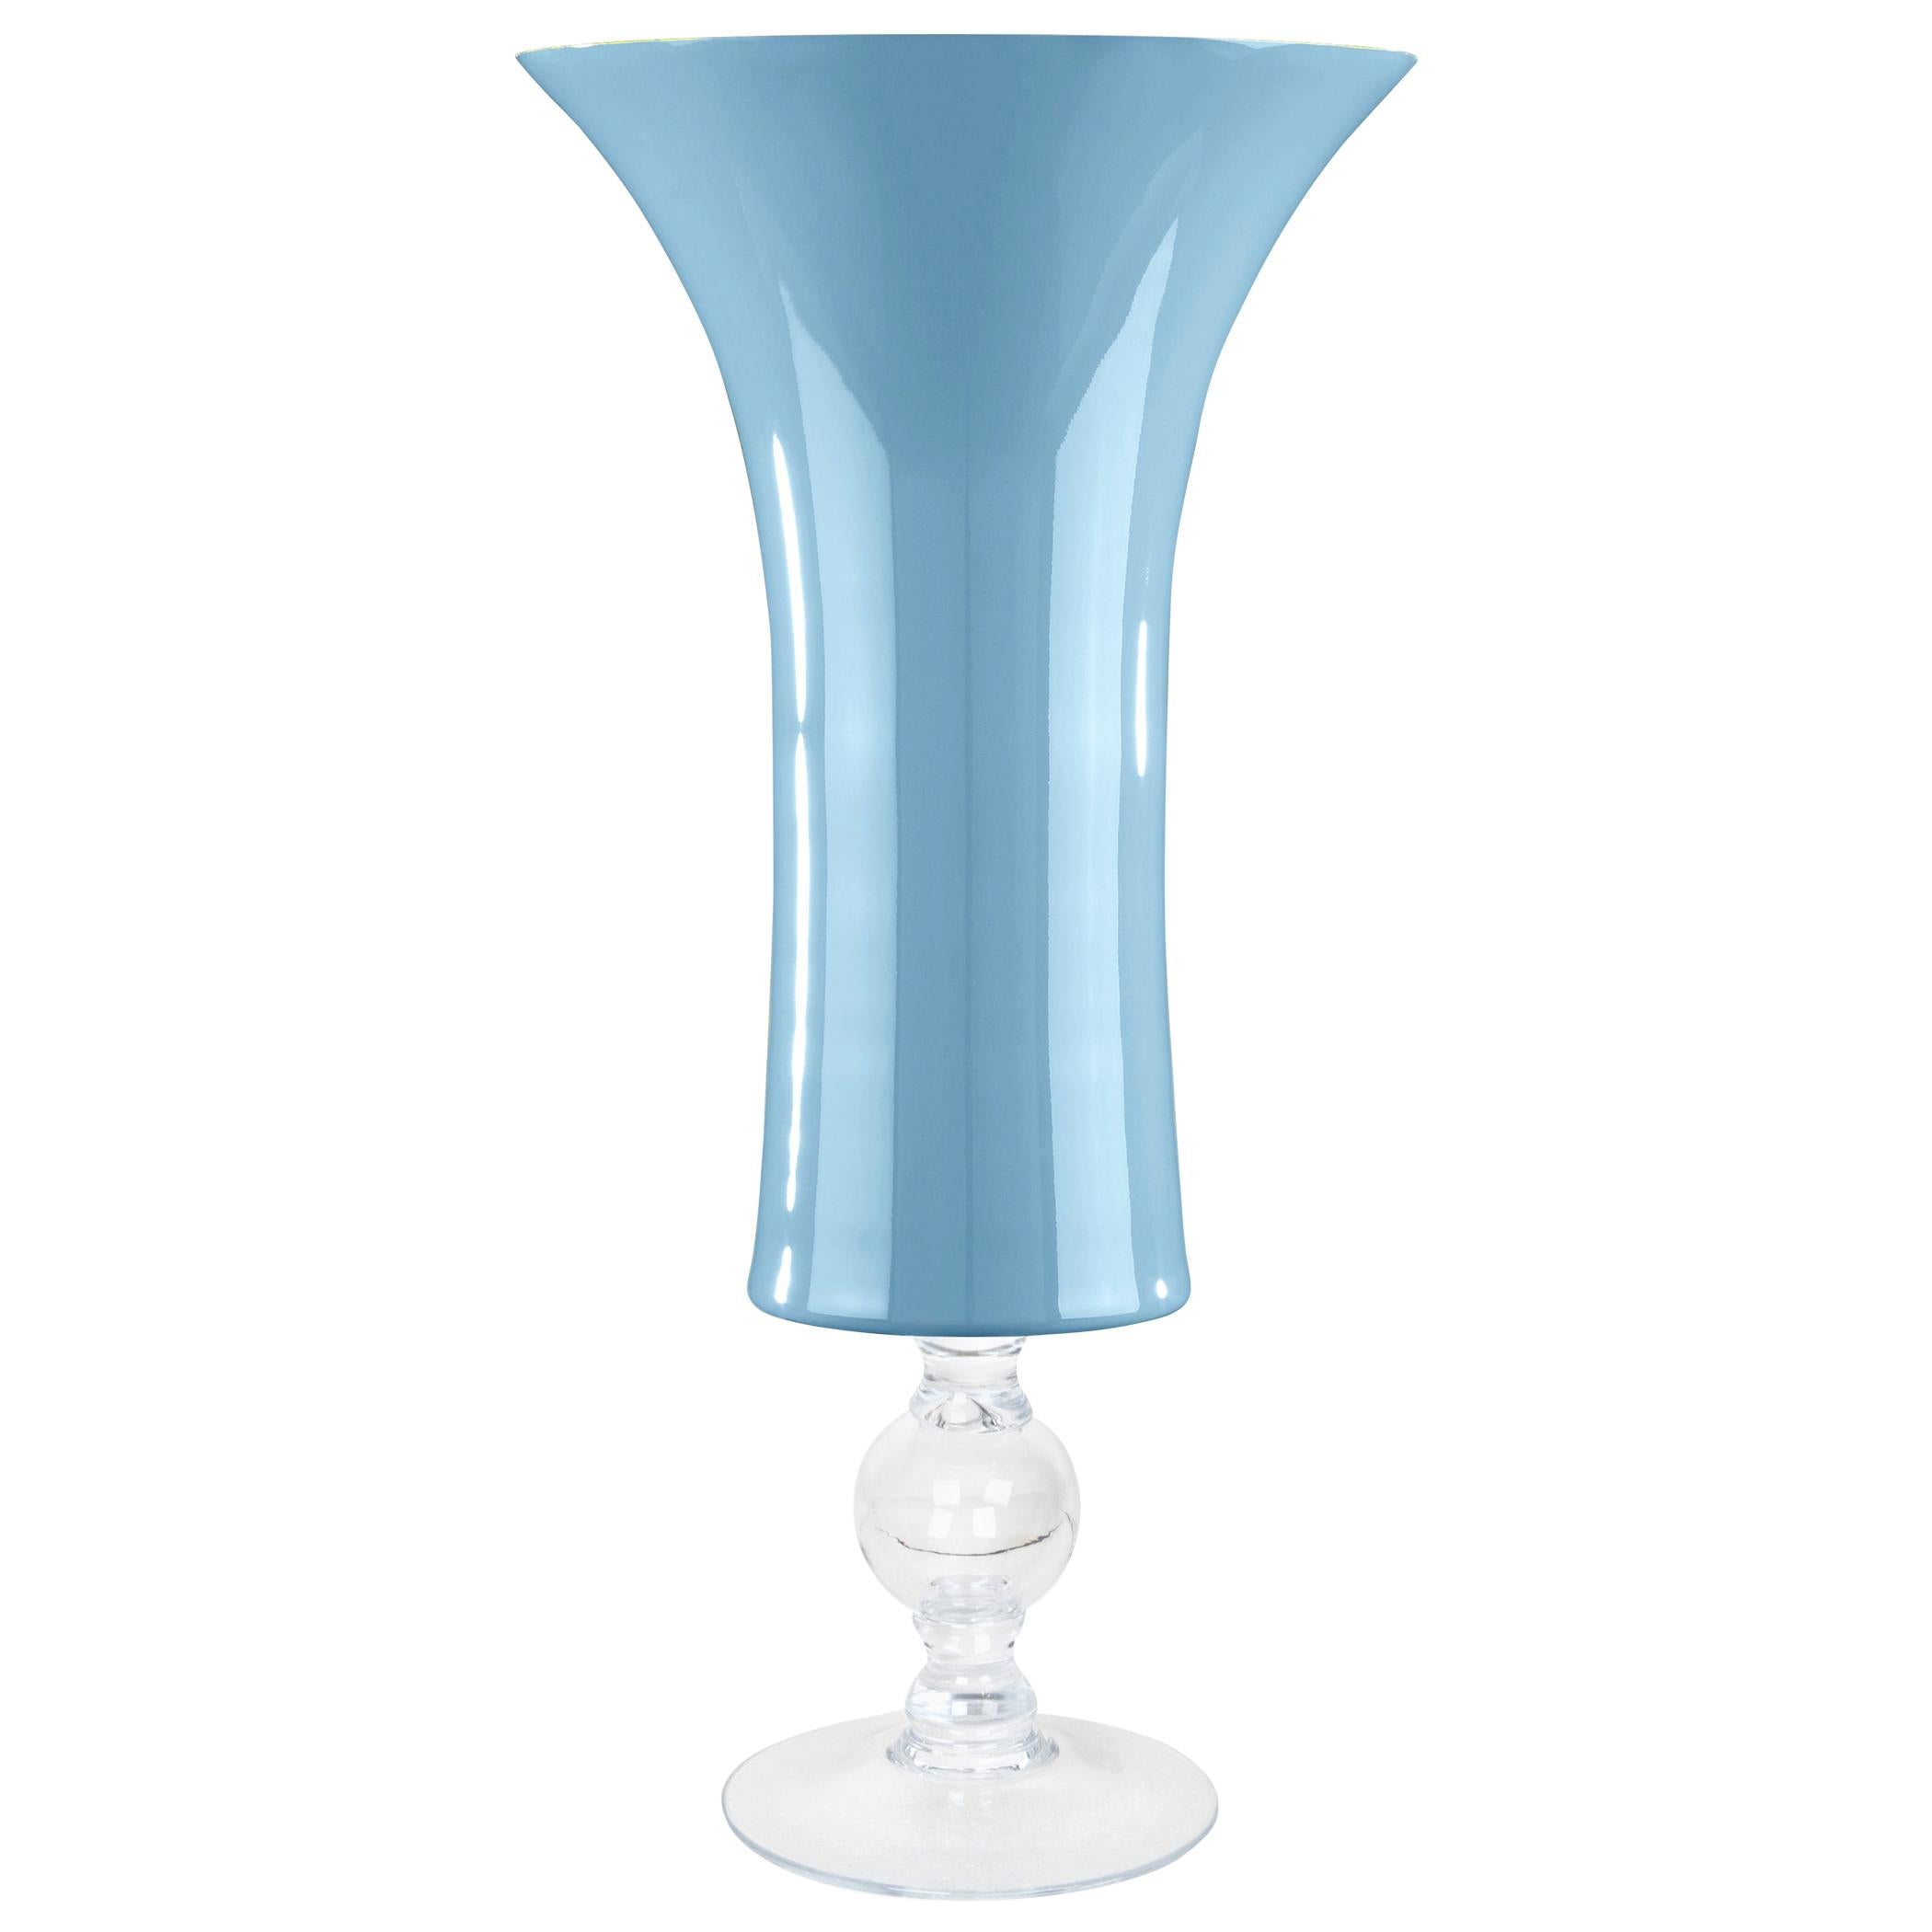 Bowl Laura Big, Purist Blue Color, 2020 Trend, in Glass, Italy